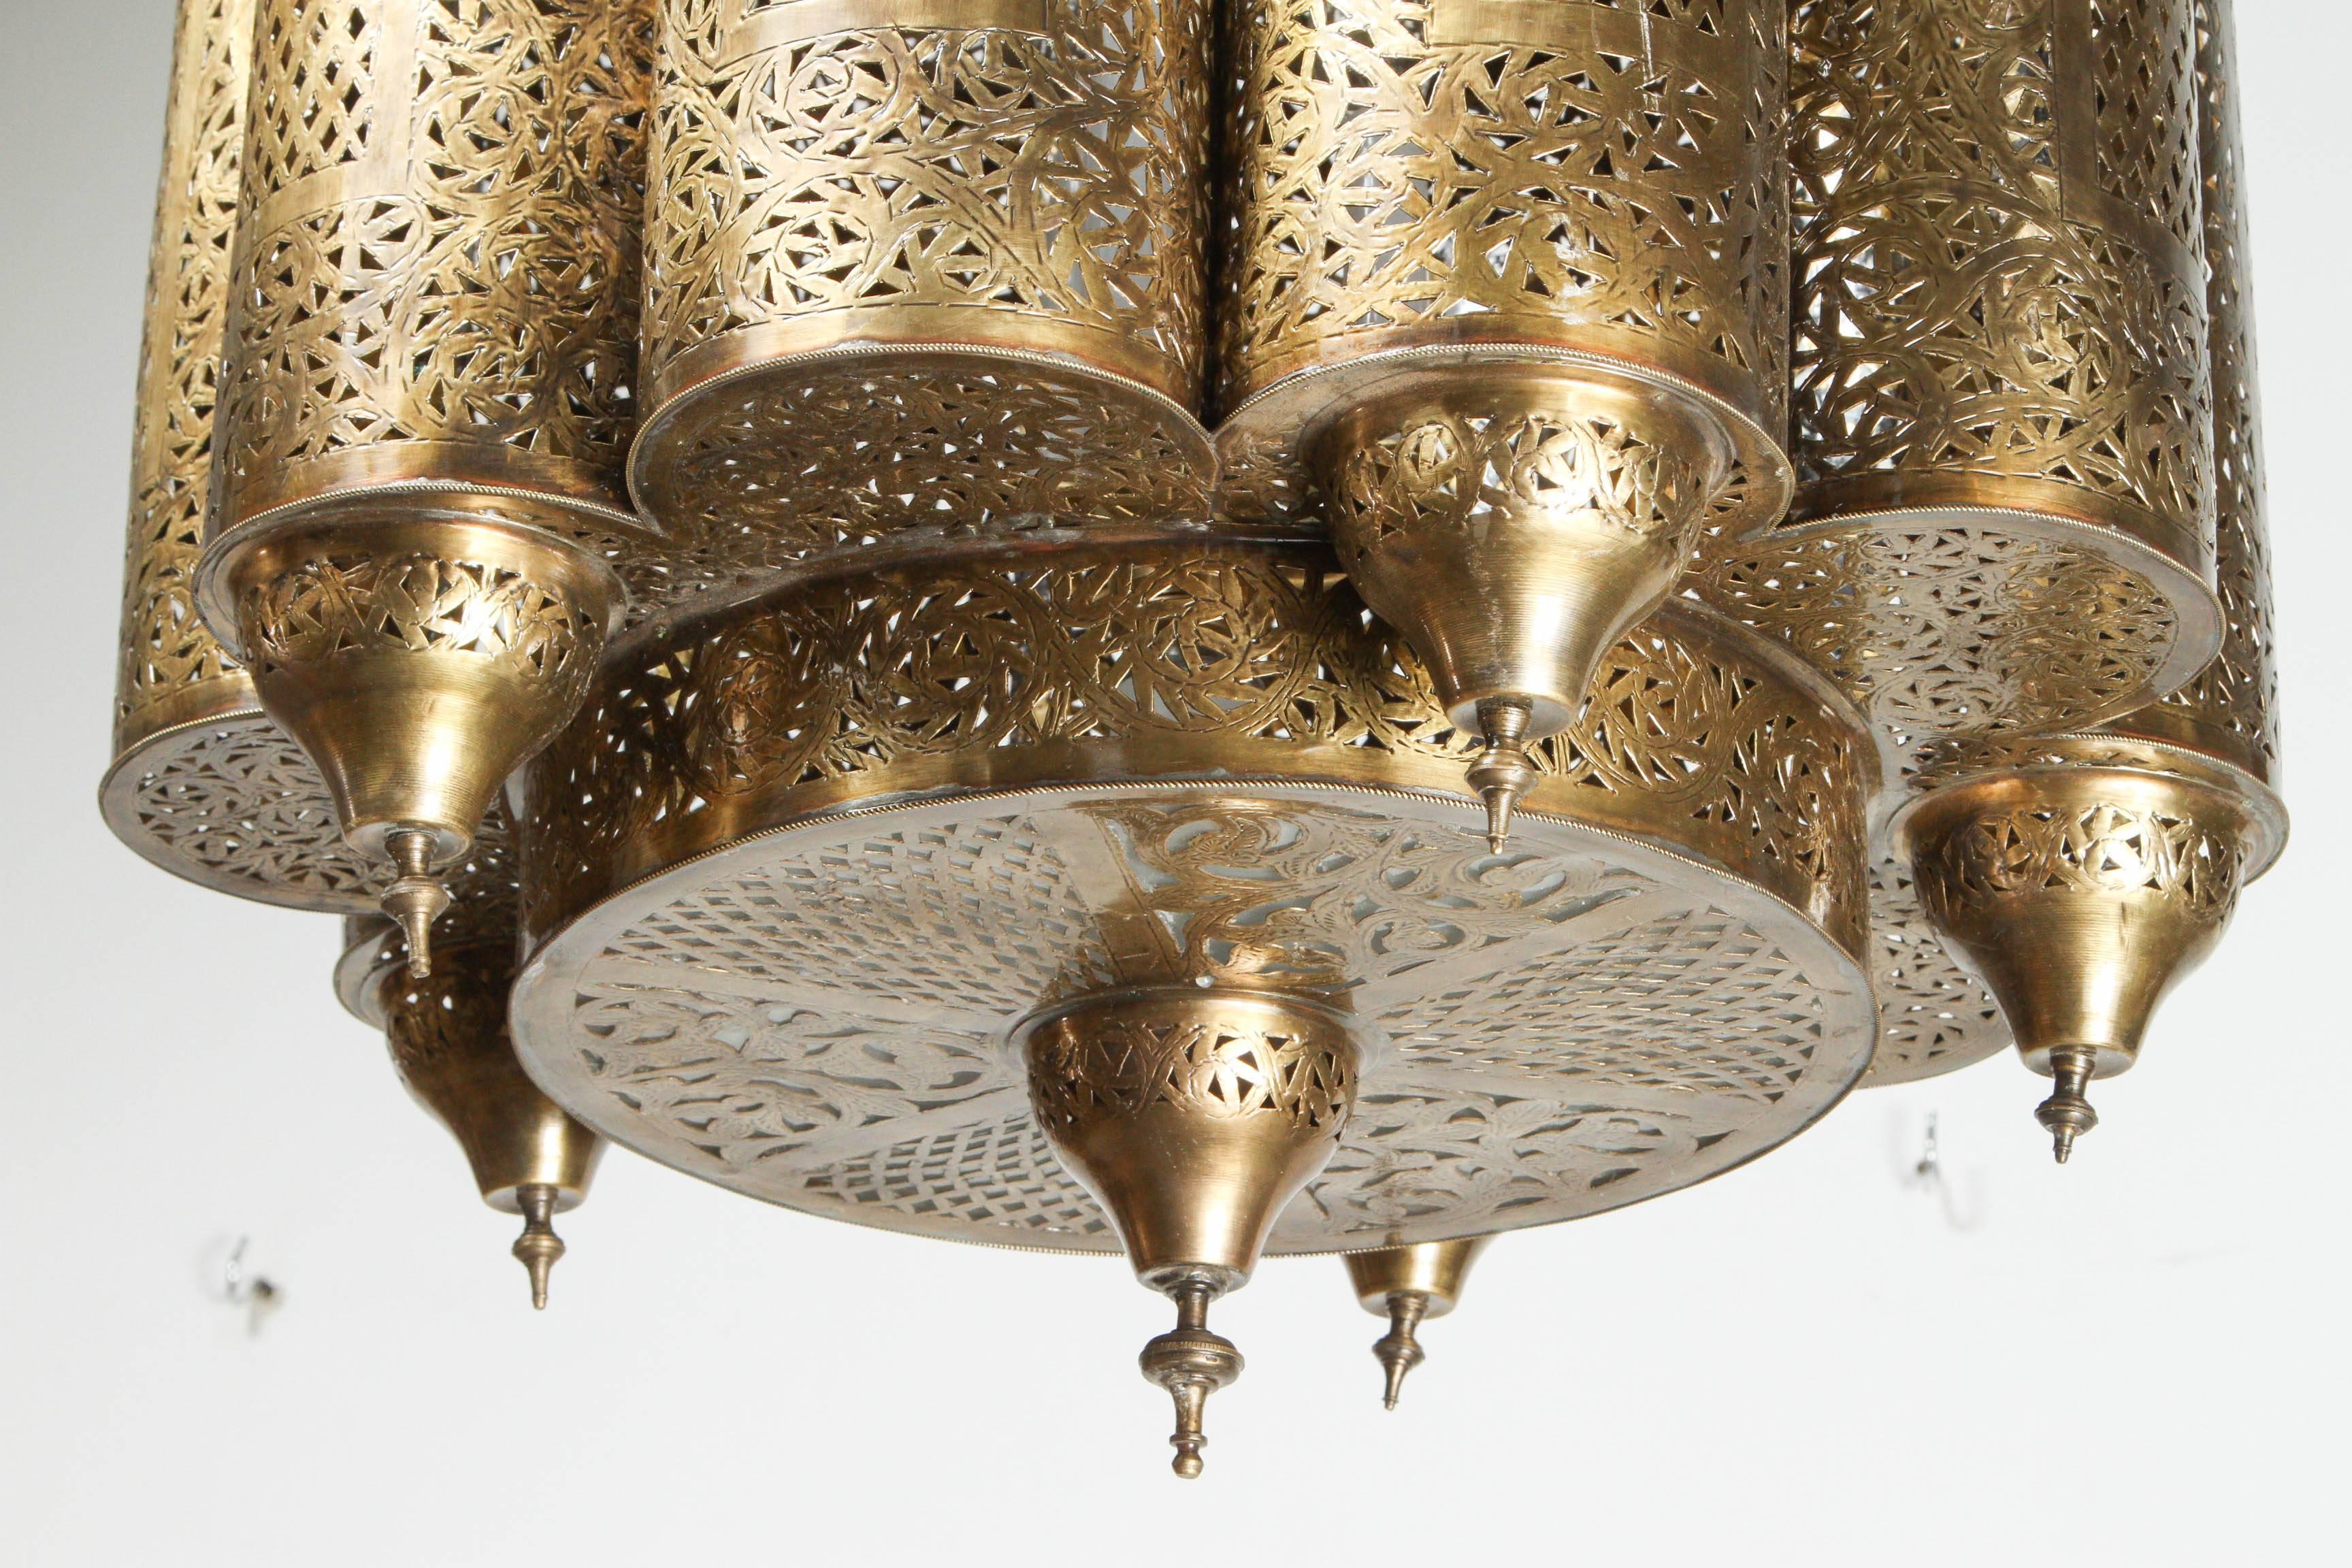 Brass Moroccan Mosque chandelier in the style of Alberto Pinto.
Moroccan Brass light fixture, delicately hand-crafted, hand-hammered and chiseled with fine filigree designs by skilled Moroccan artisans.
The size of the light fixture is 22" H